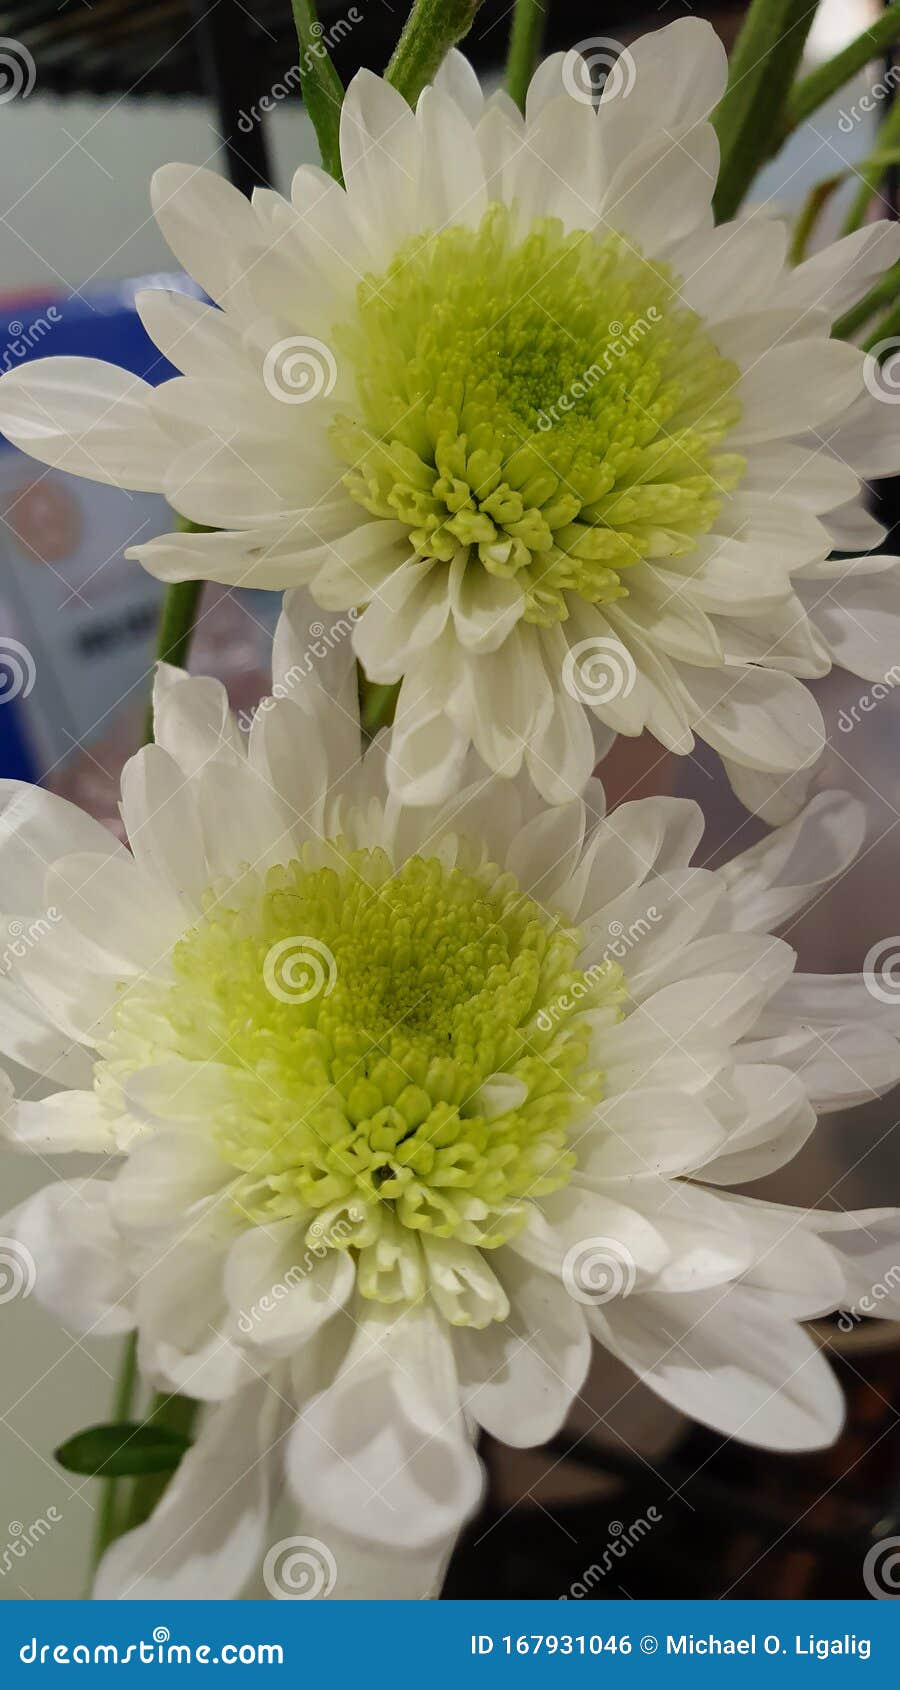 delicate white and green flowers